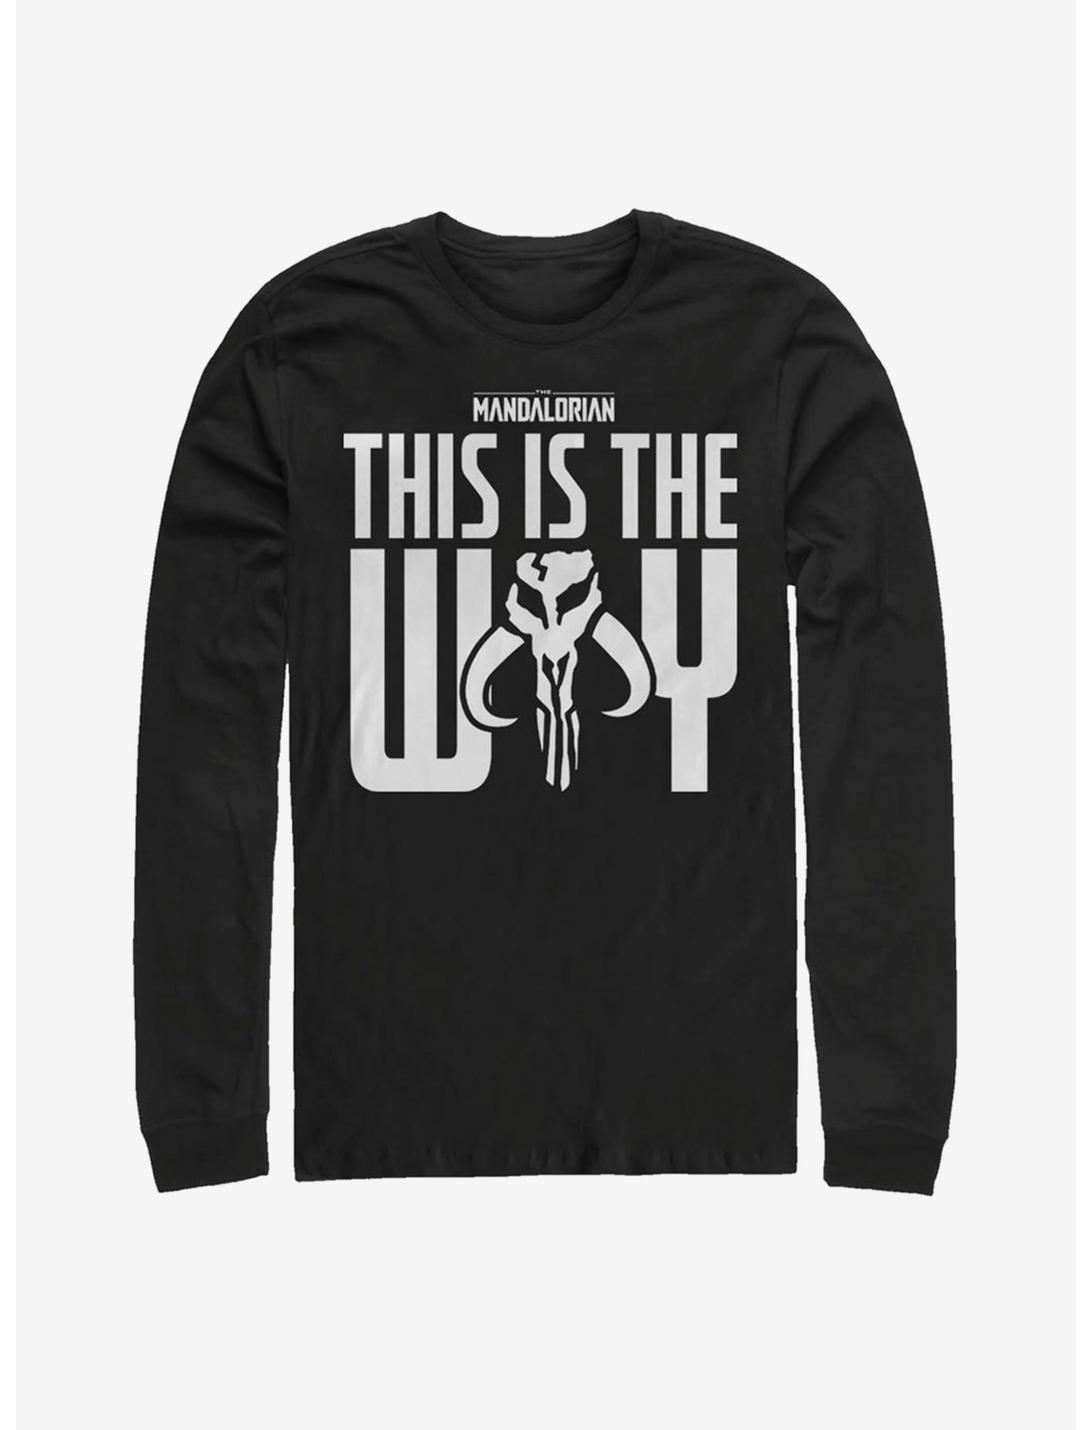 Plus Size Star Wars The Mandalorian This Is The Way Long-Sleeve T-Shirt, BLACK, hi-res